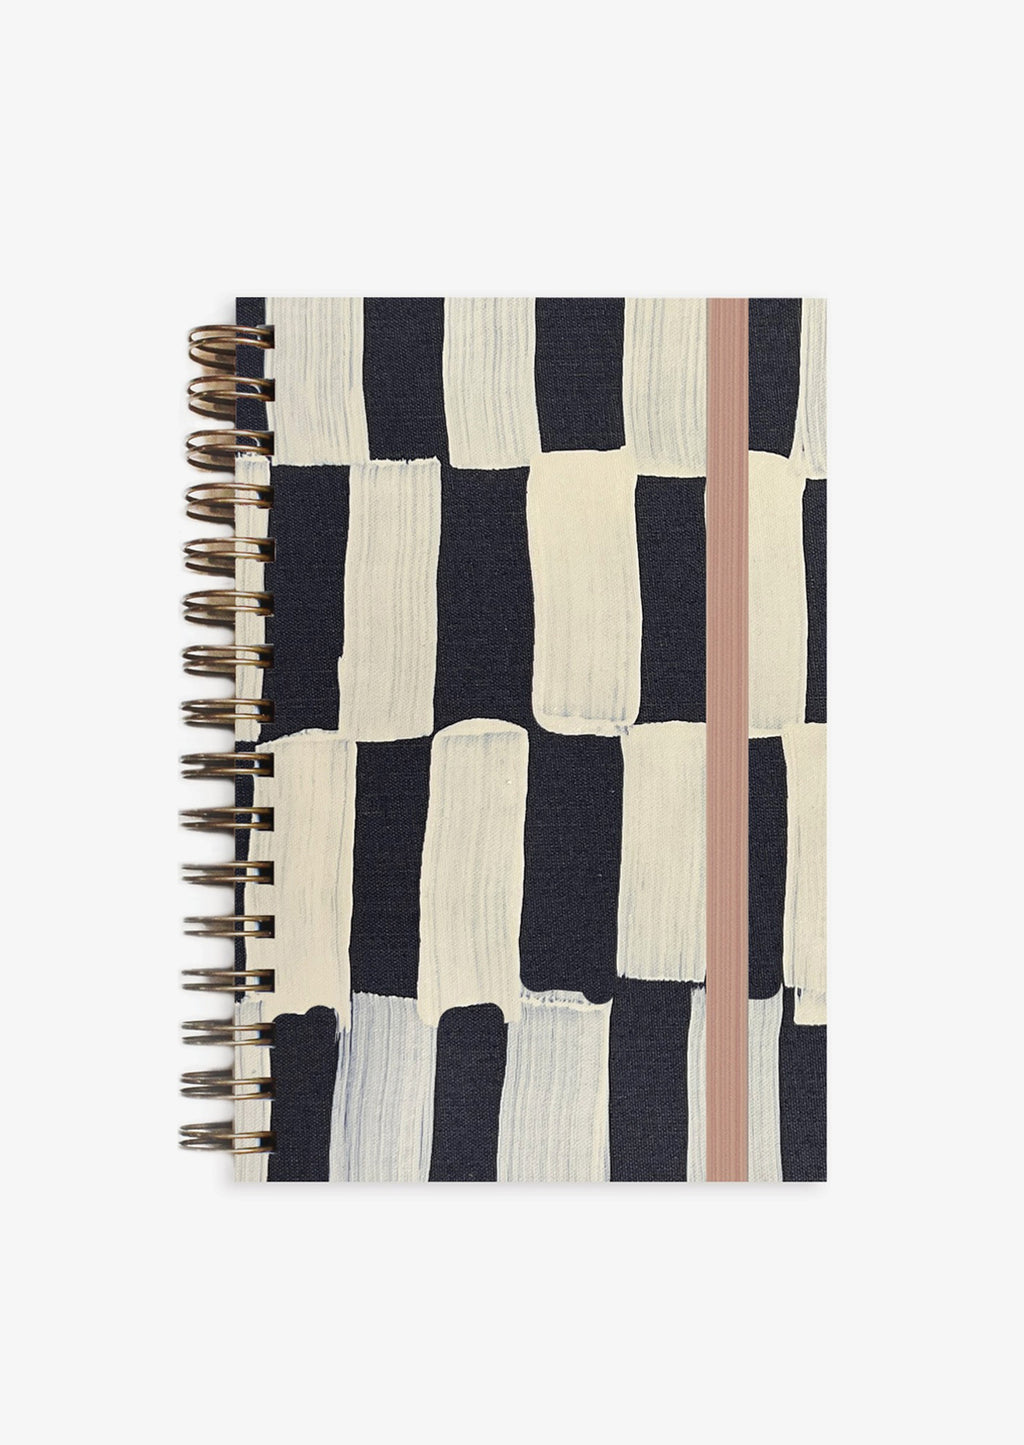 Small / Monotone Blocks [$32.00]: A black and white geometric painted spiral bound notebook.